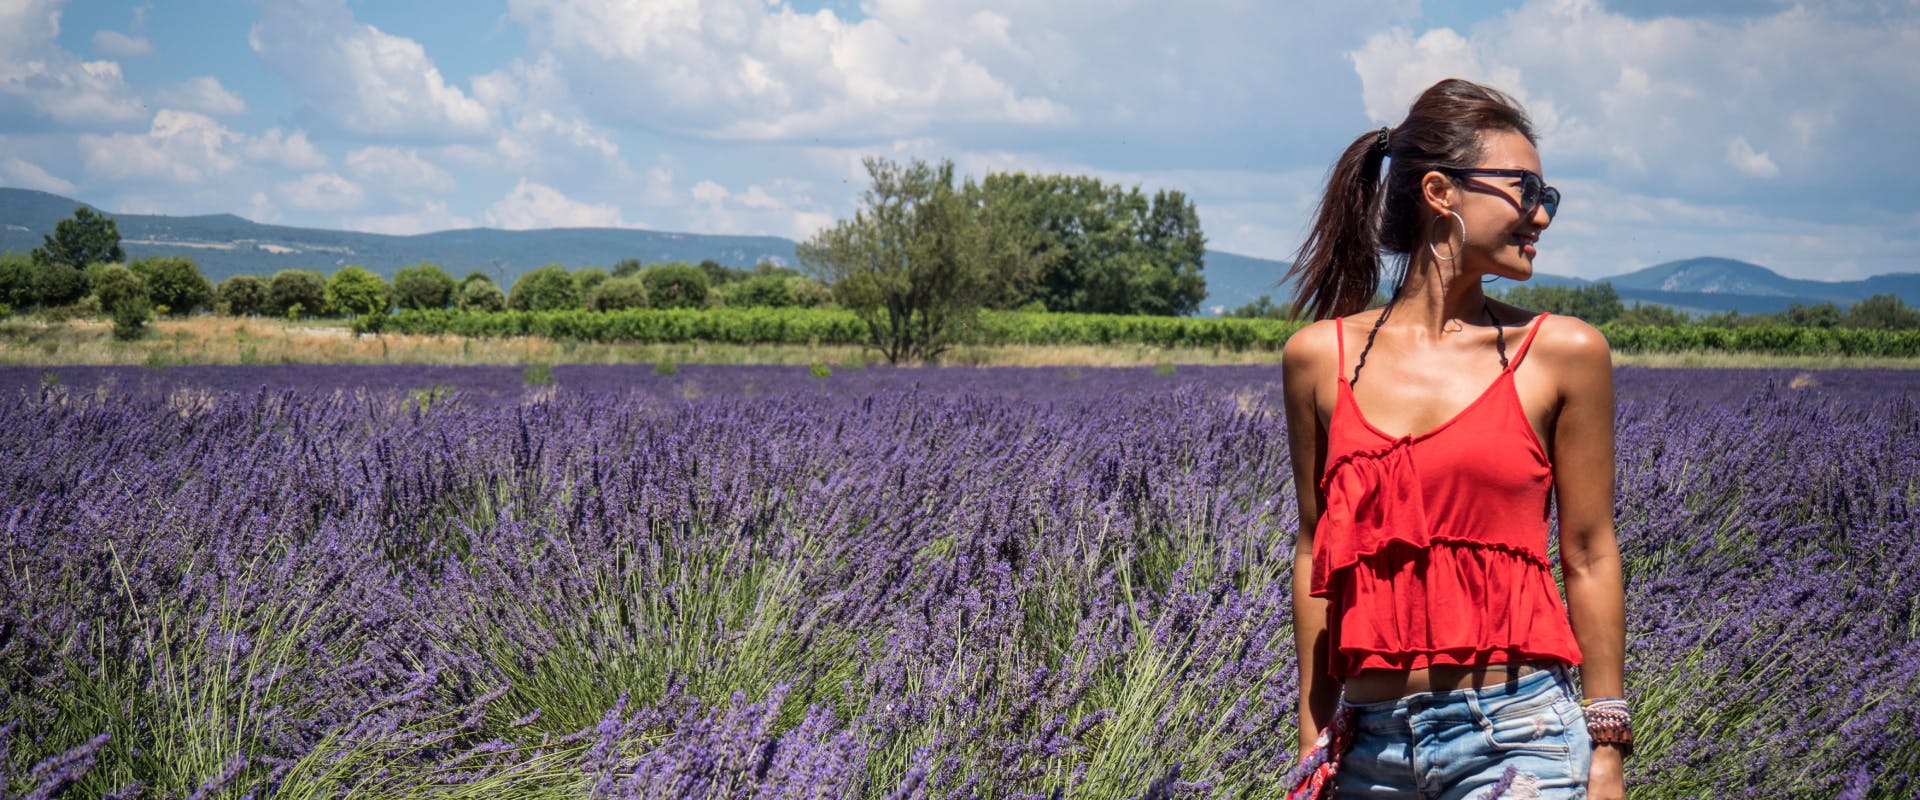 a solo female traveler in France standing next to a lavender field